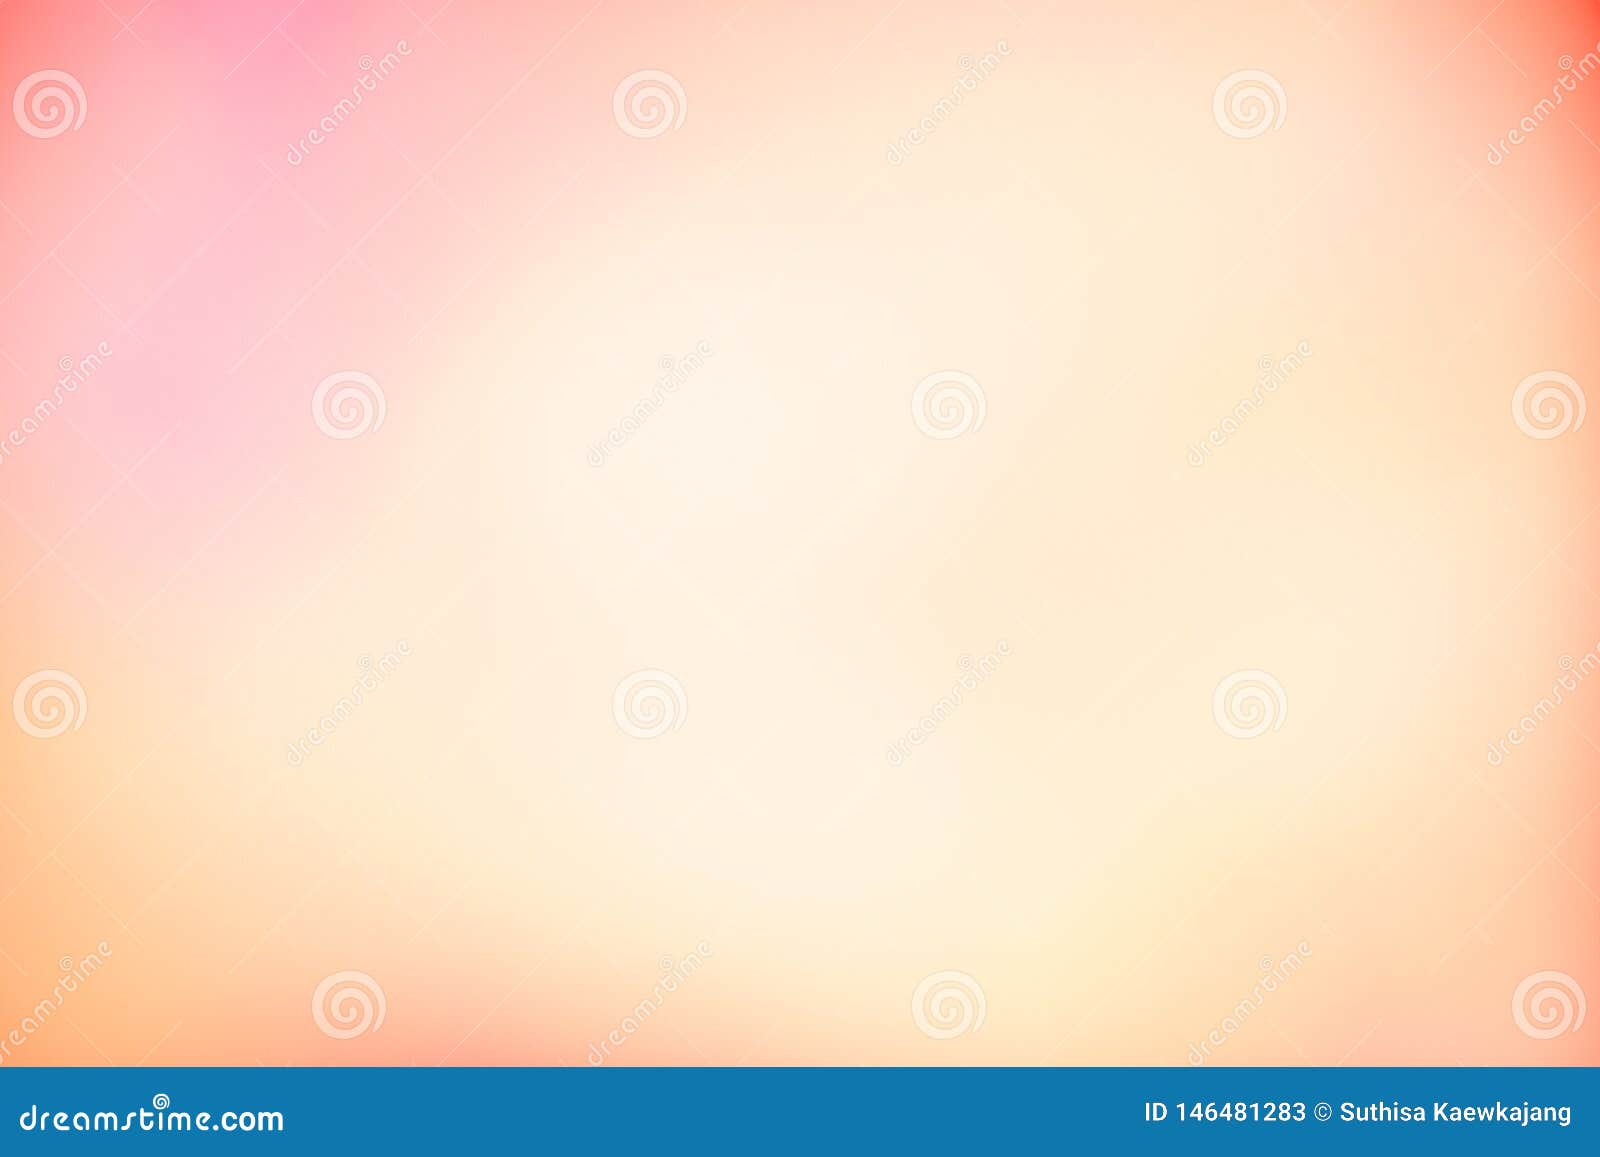 Abstract Blur Light Gradient Pink Soft Pastel Color Wallpaper Background Stock Image Image Of Melt Pastel 146481283